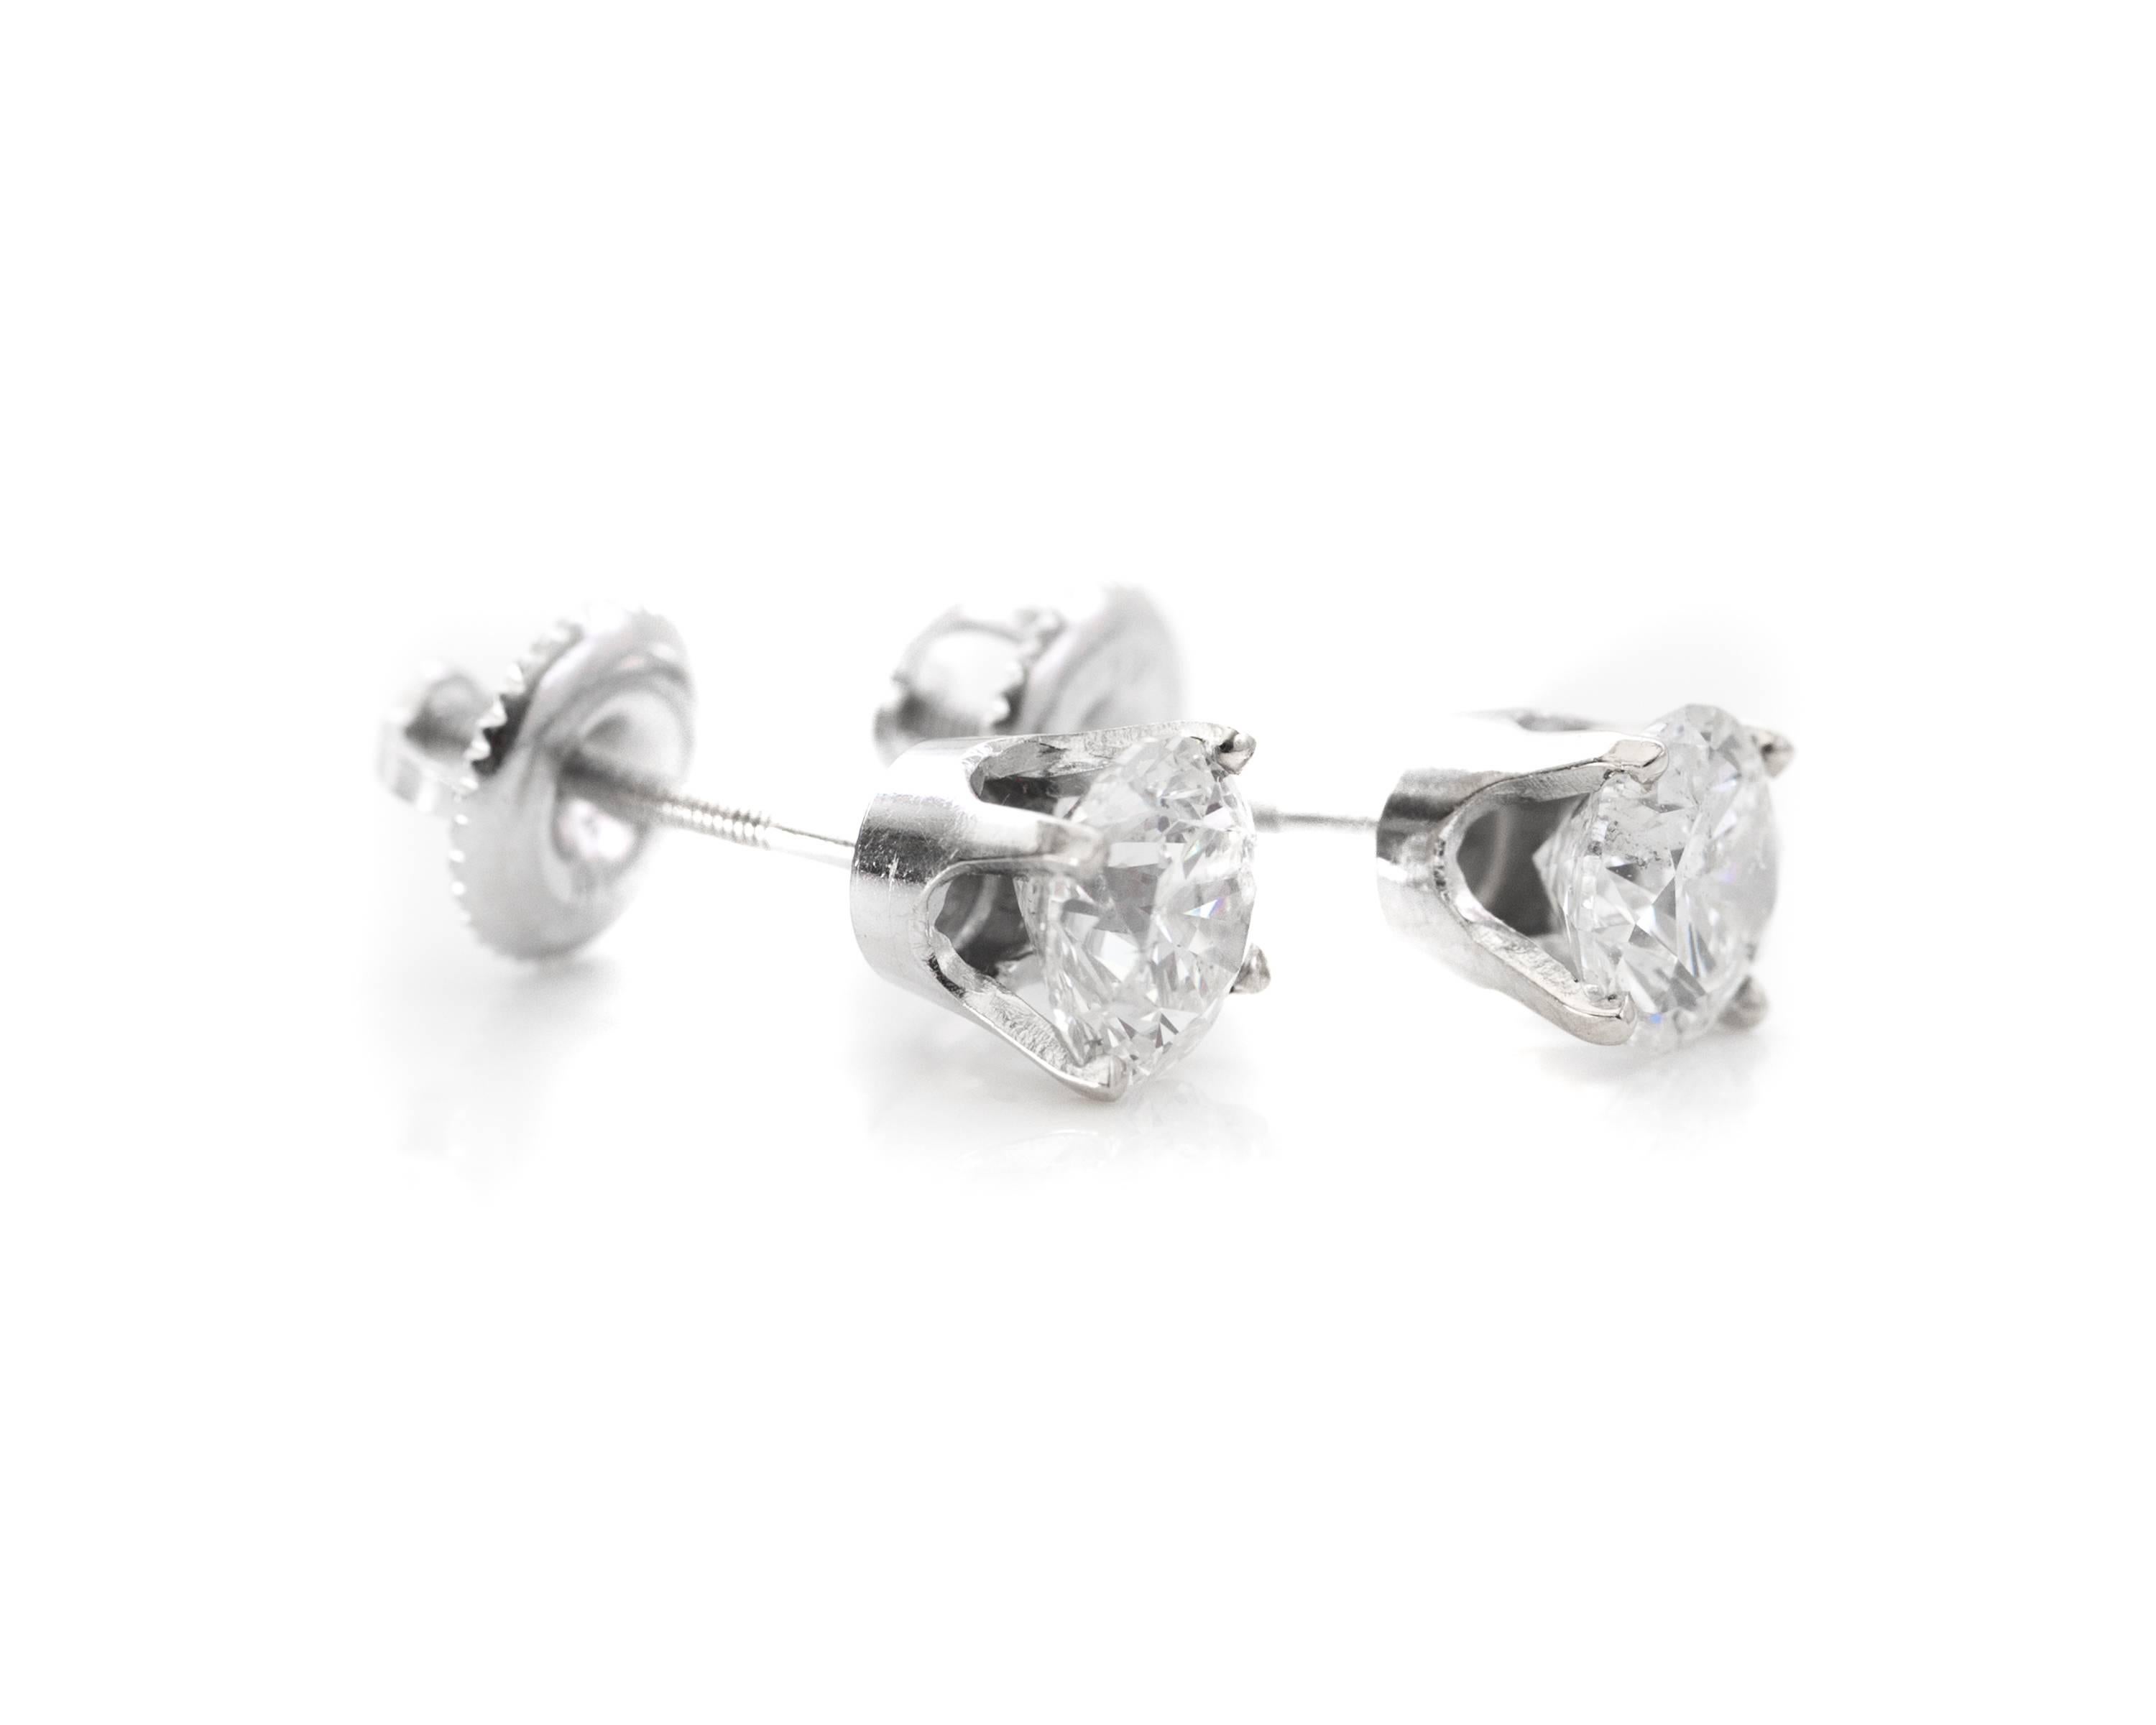 1960s 14K White Gold, Diamond Stud Earrings.

Feature:
 Screw Back Posts
 5.7 millimeter Round Brilliant Diamonds in 4-prong setting. 
Each Diamond weighs .75 carats for a 1.5 carat total weight for the pair. 
The diamonds have no visible